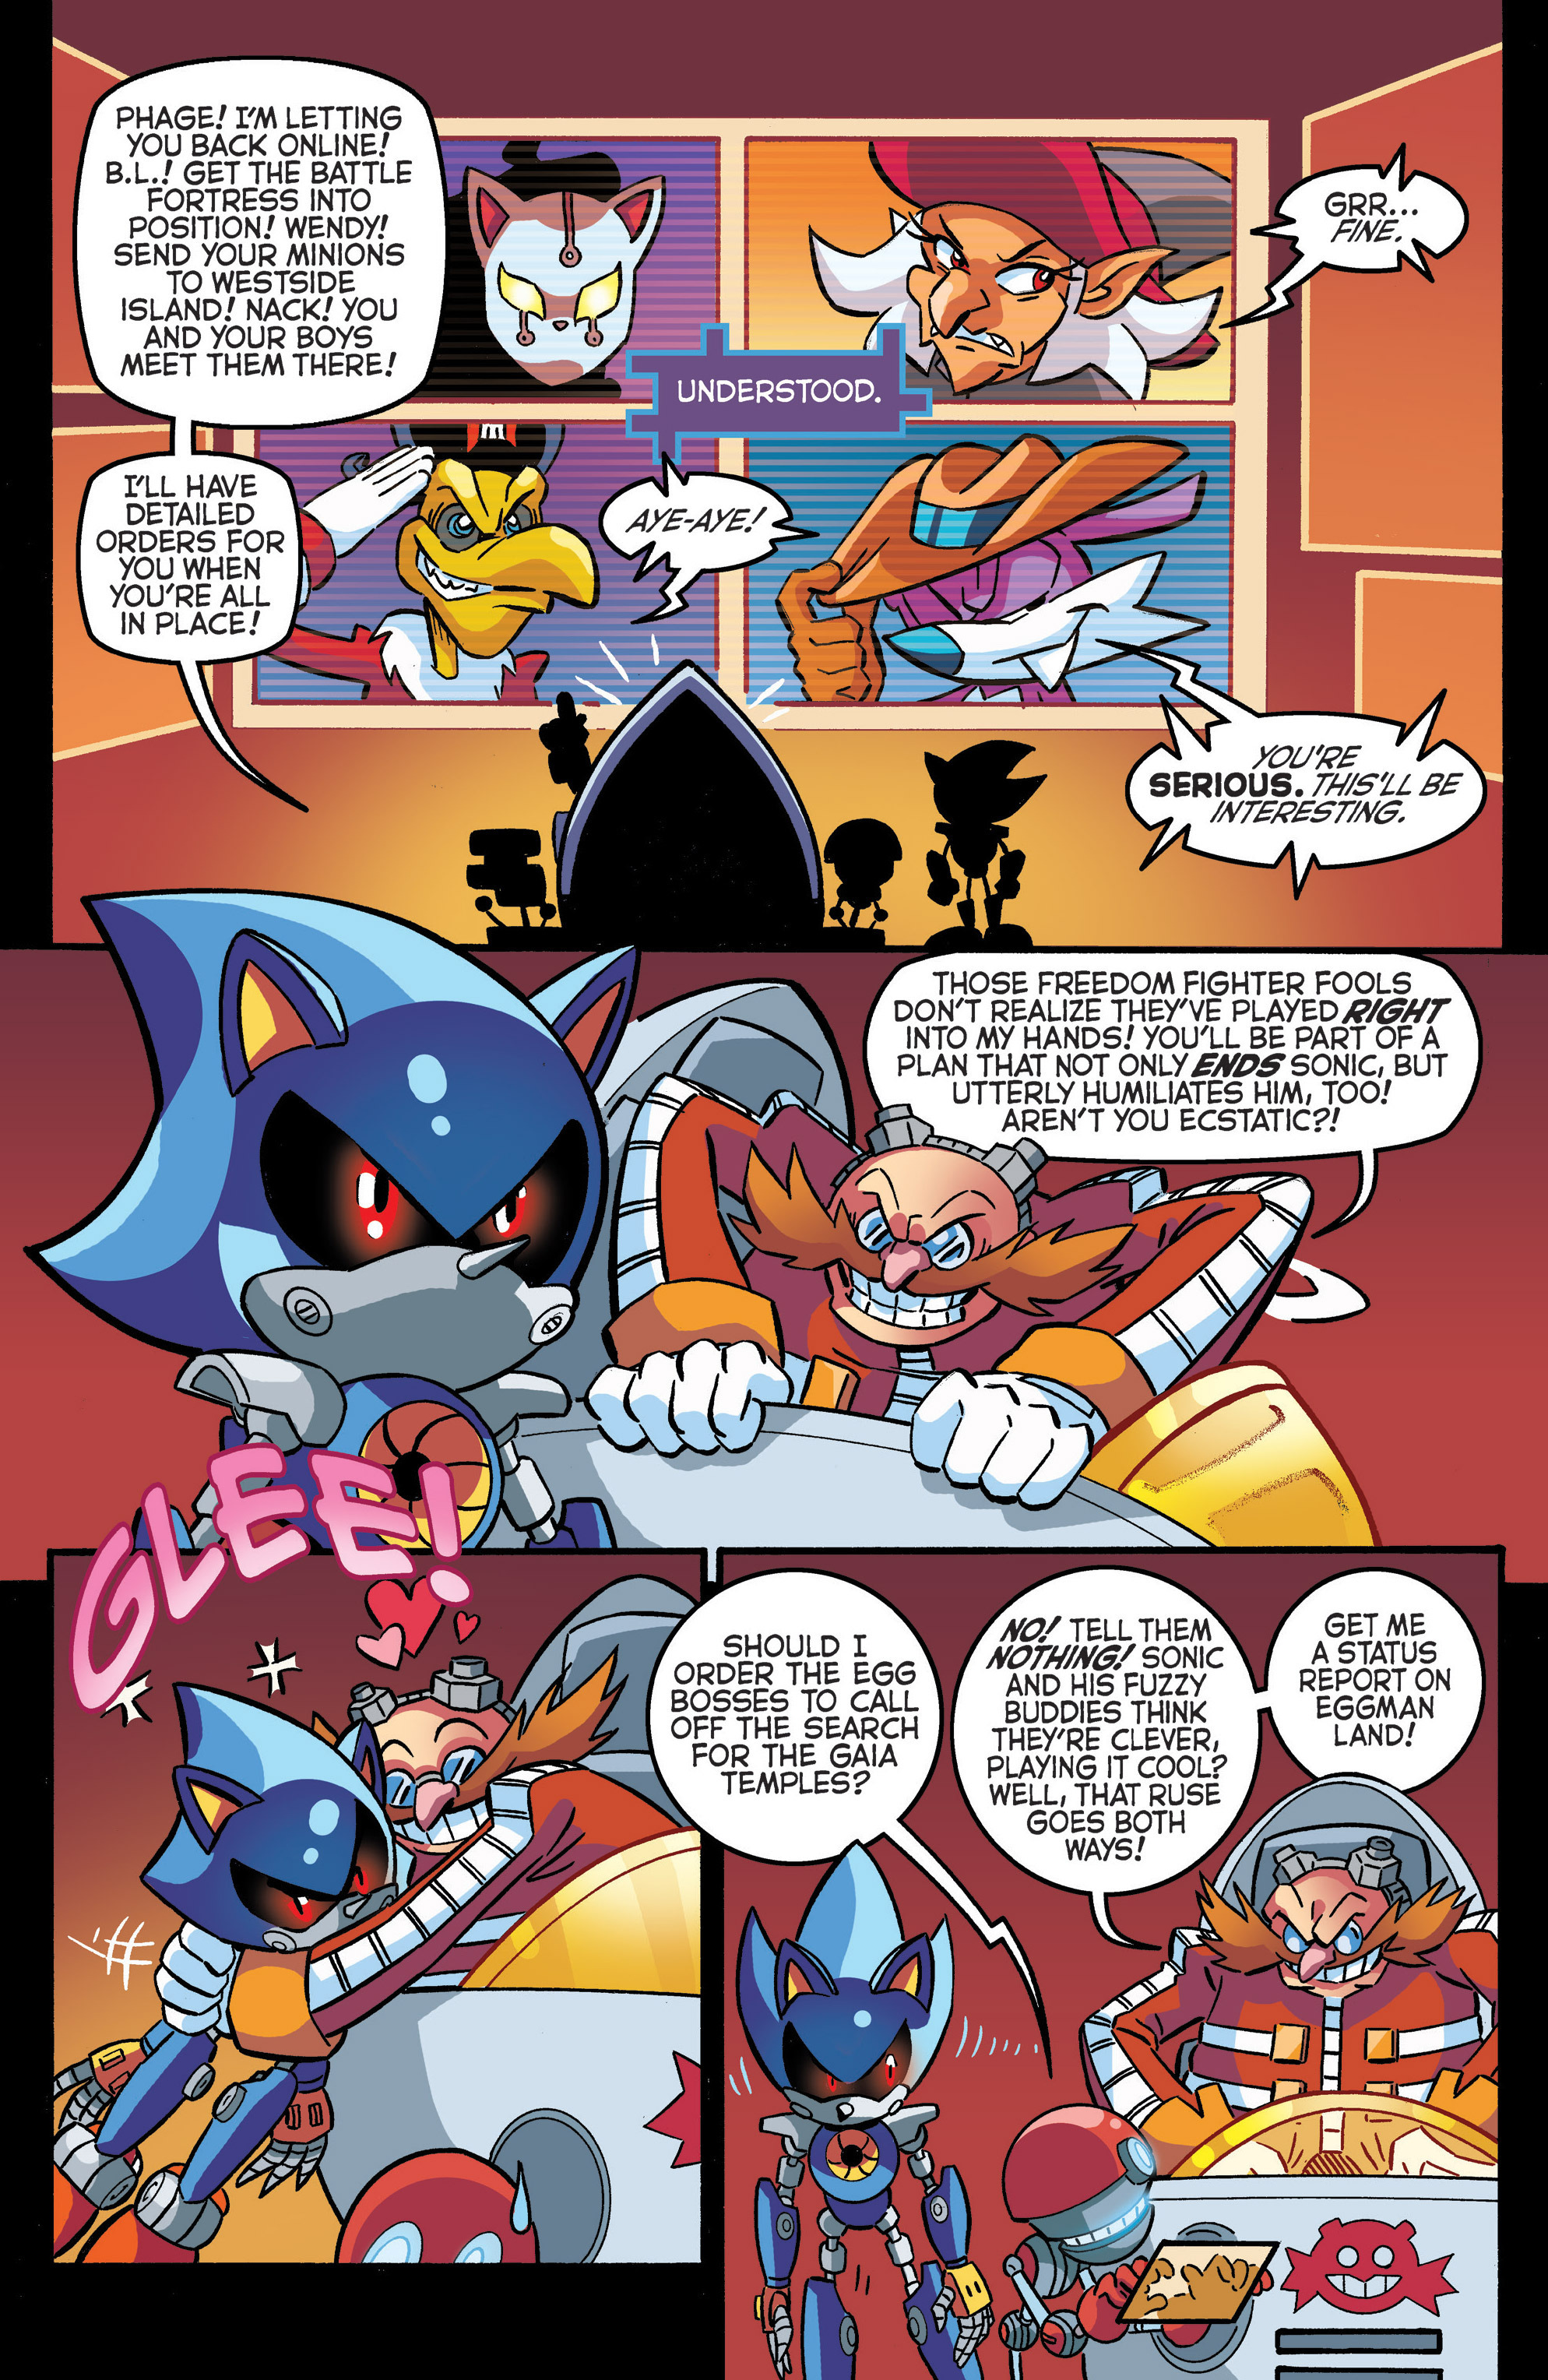 Archie Sonic the Hedgehog Issue 283